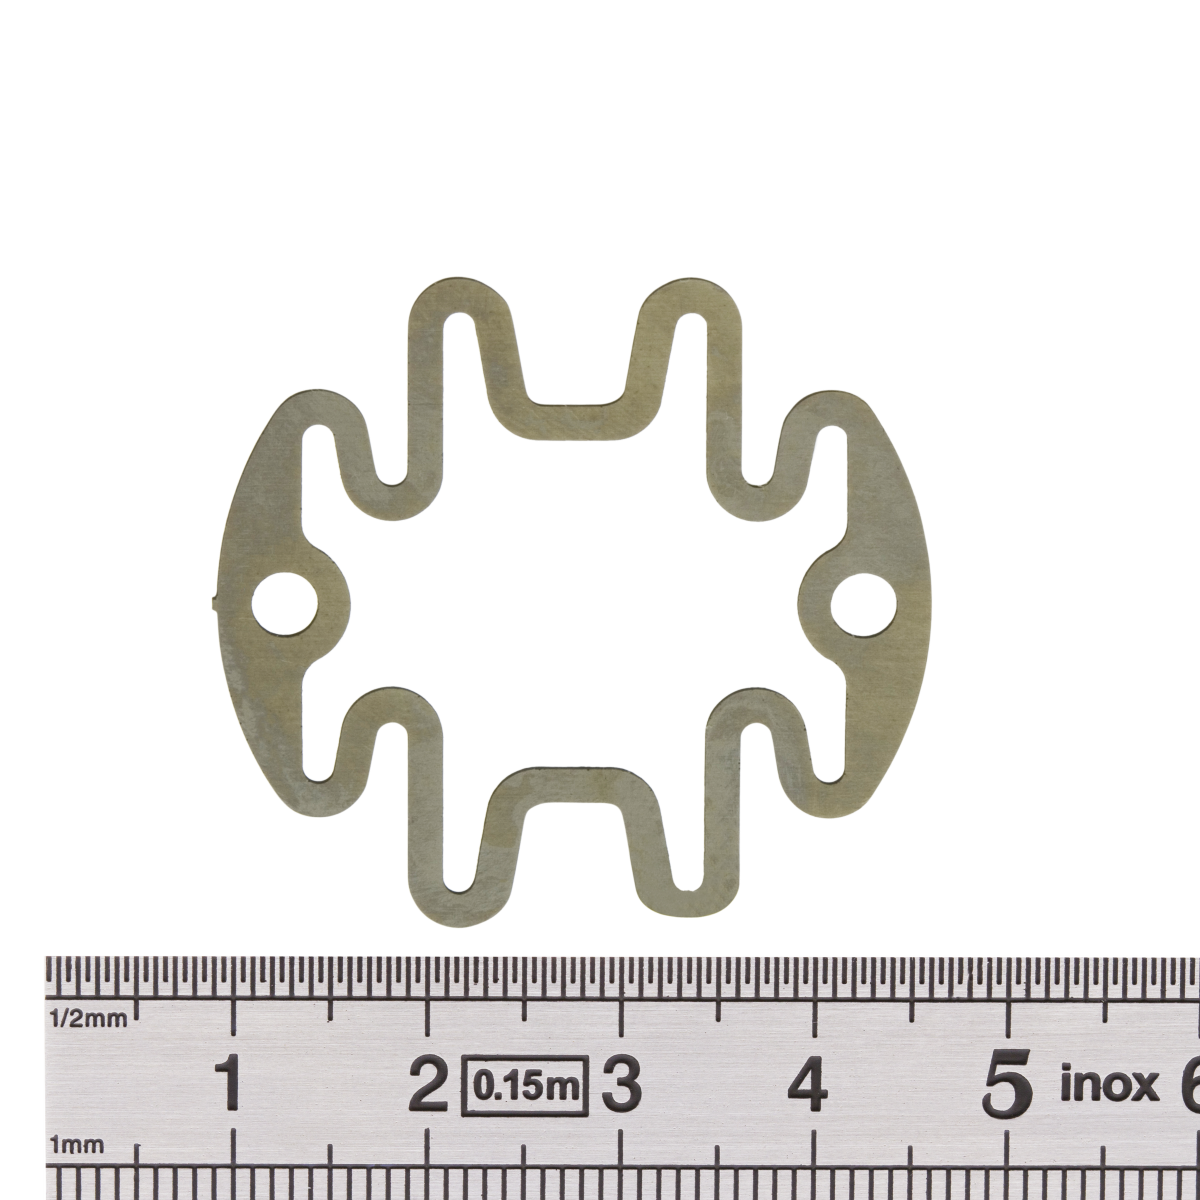 metal part with complex shape by chemical cutting